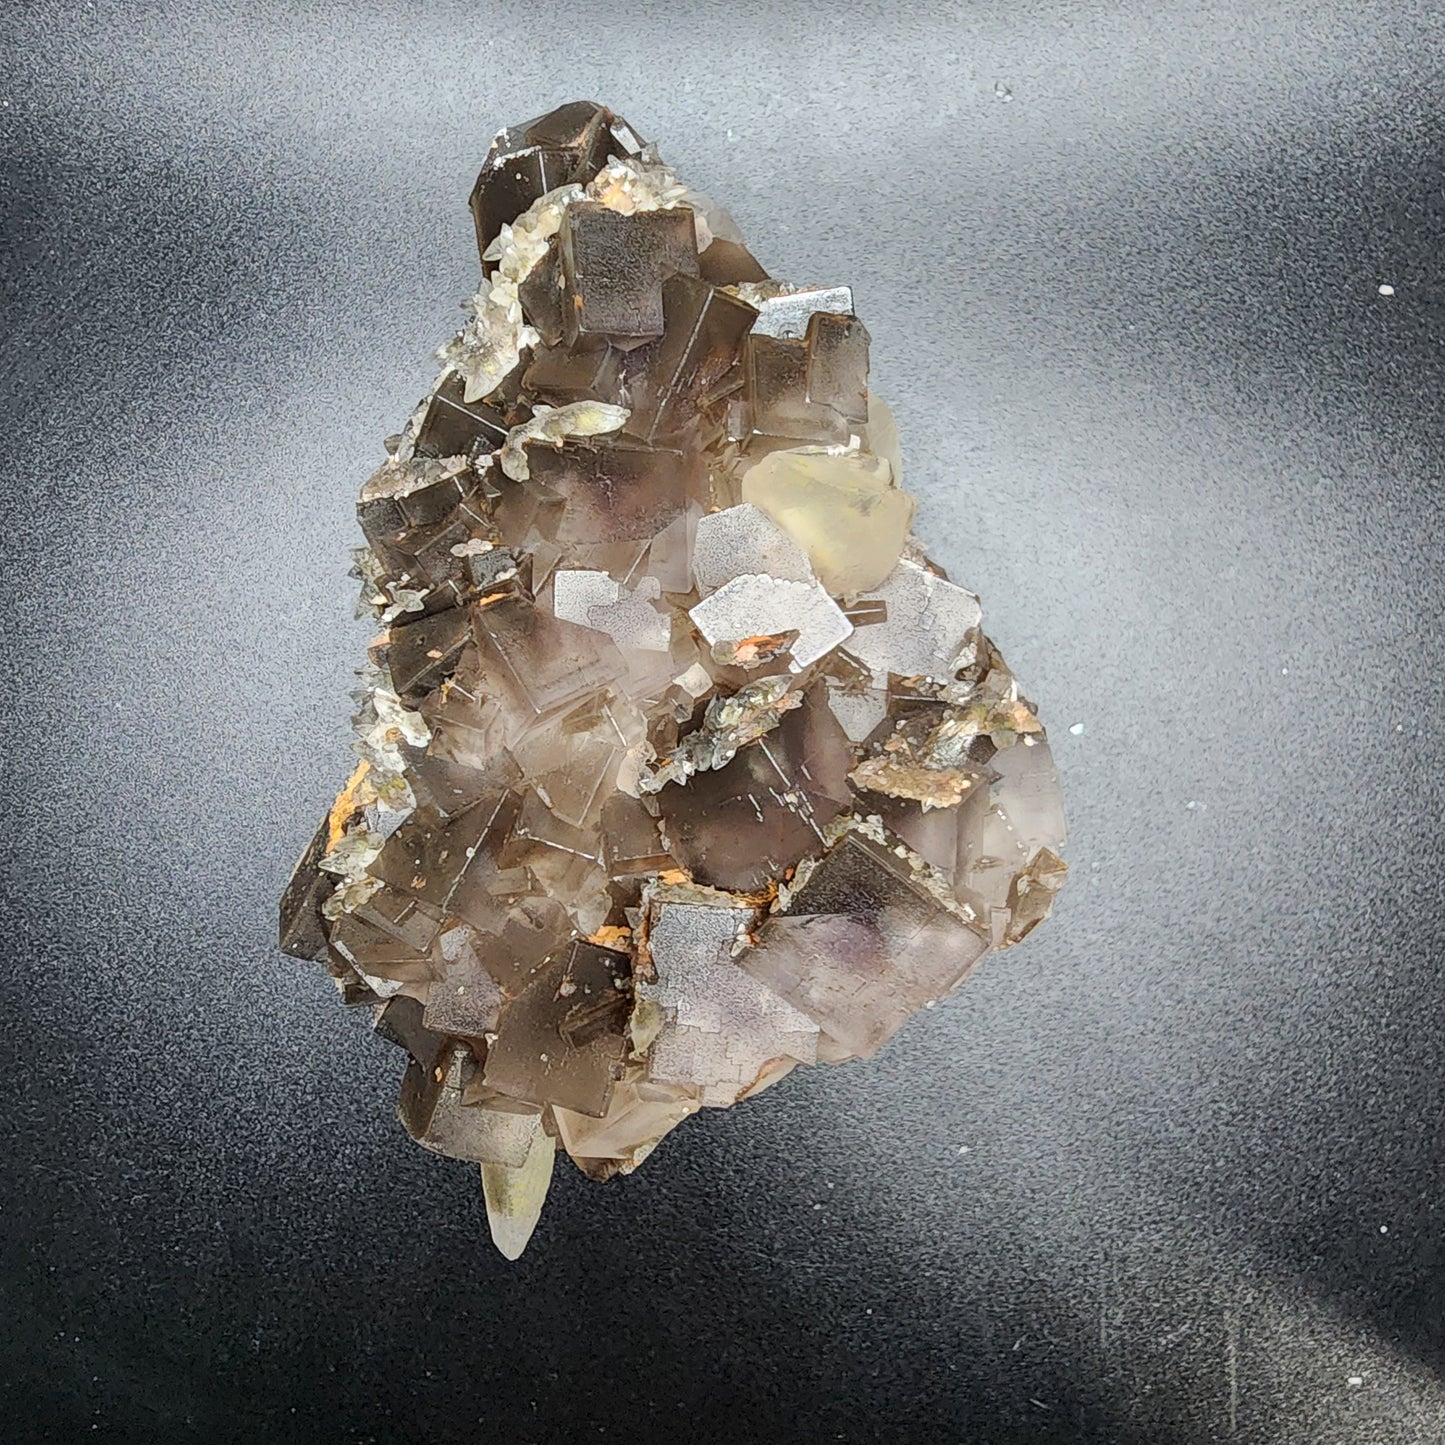 Fabulous Fluorite with Dogtooth Calcite